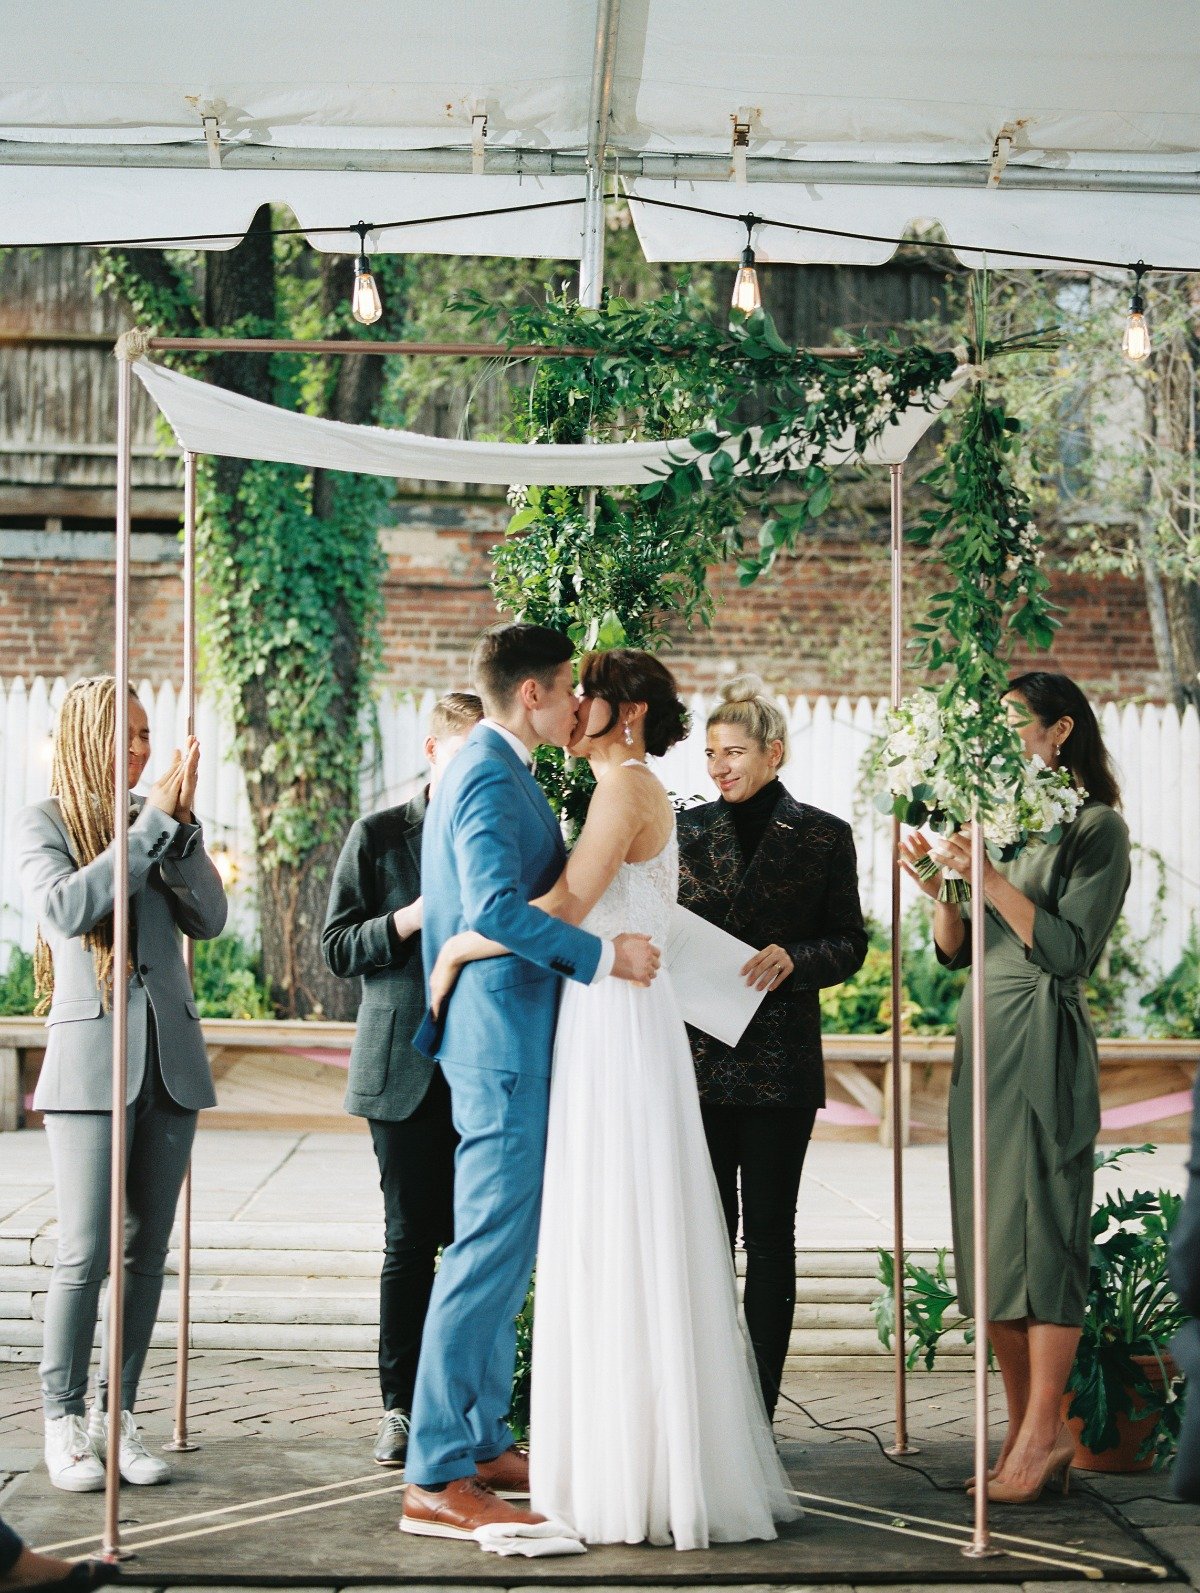 How To Have A Fun and Unforgettable Wedding With Family and Friends